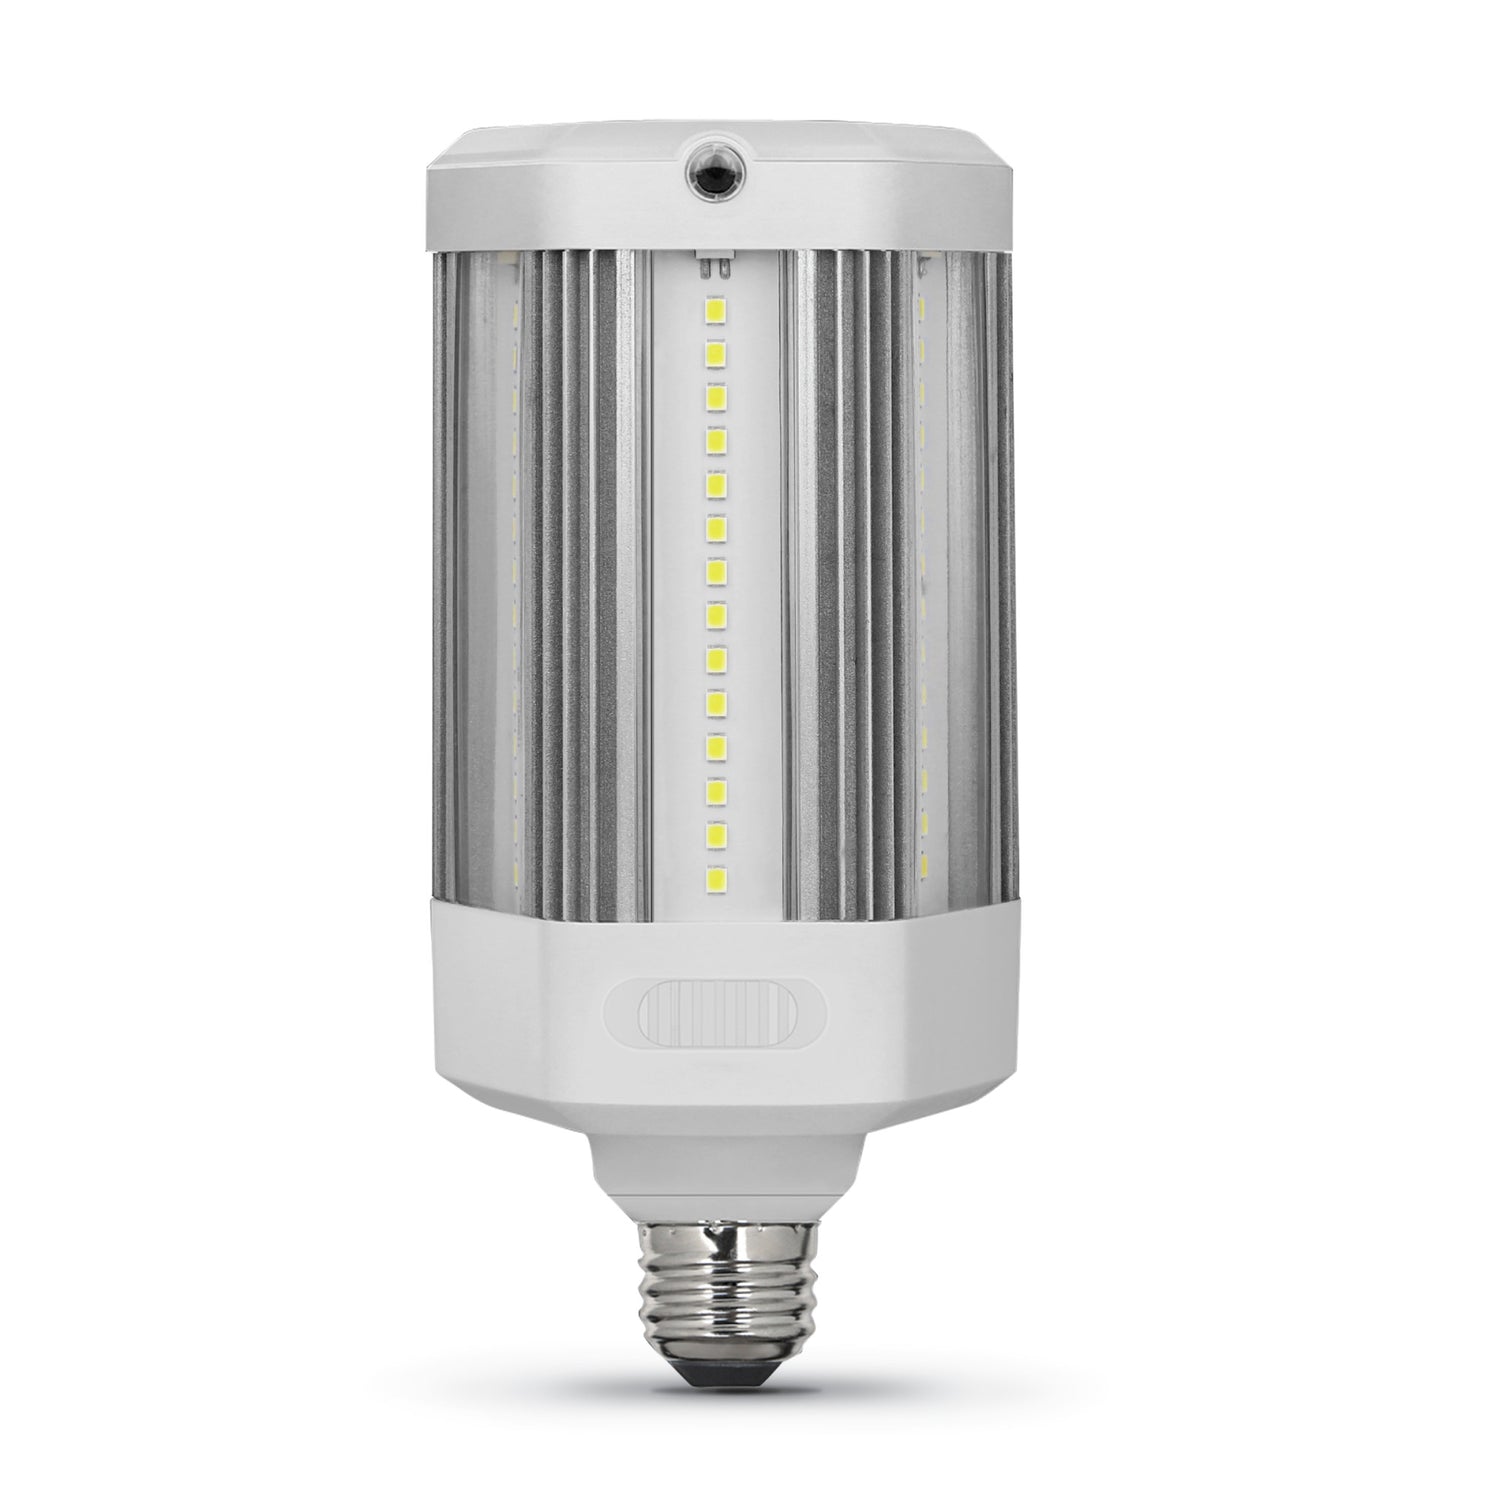 45W (300W Replacement) Daylight (5000K) Corn Cob Yard Light With Dusk to Dawn and Motion Sensors